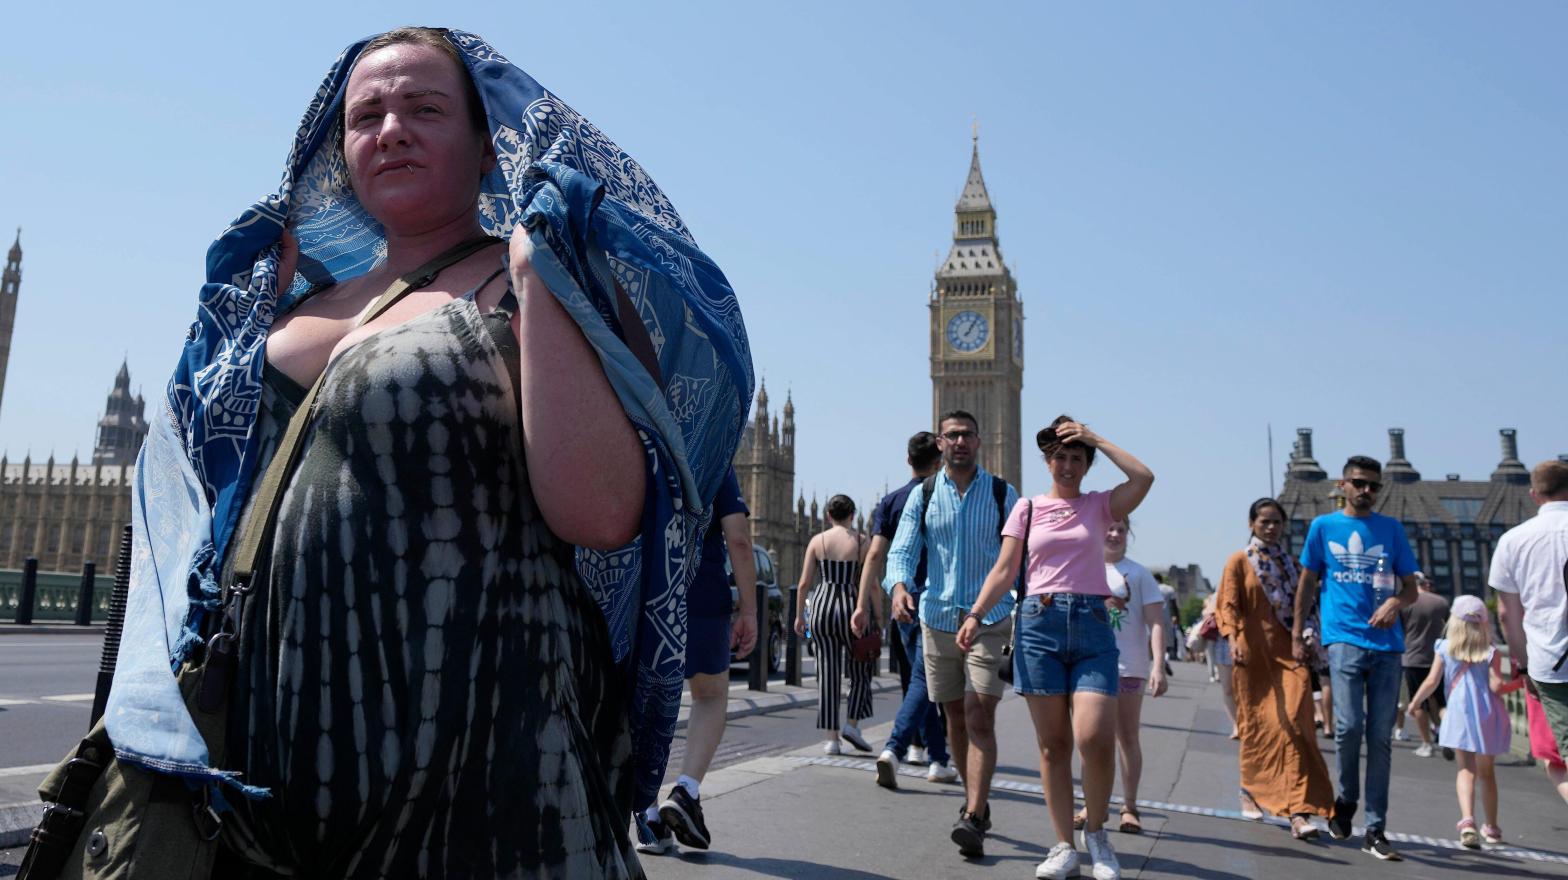 Pedestrians try to keep themselves cool in London on Tuesday. (Photo: Frank Augstein, AP)